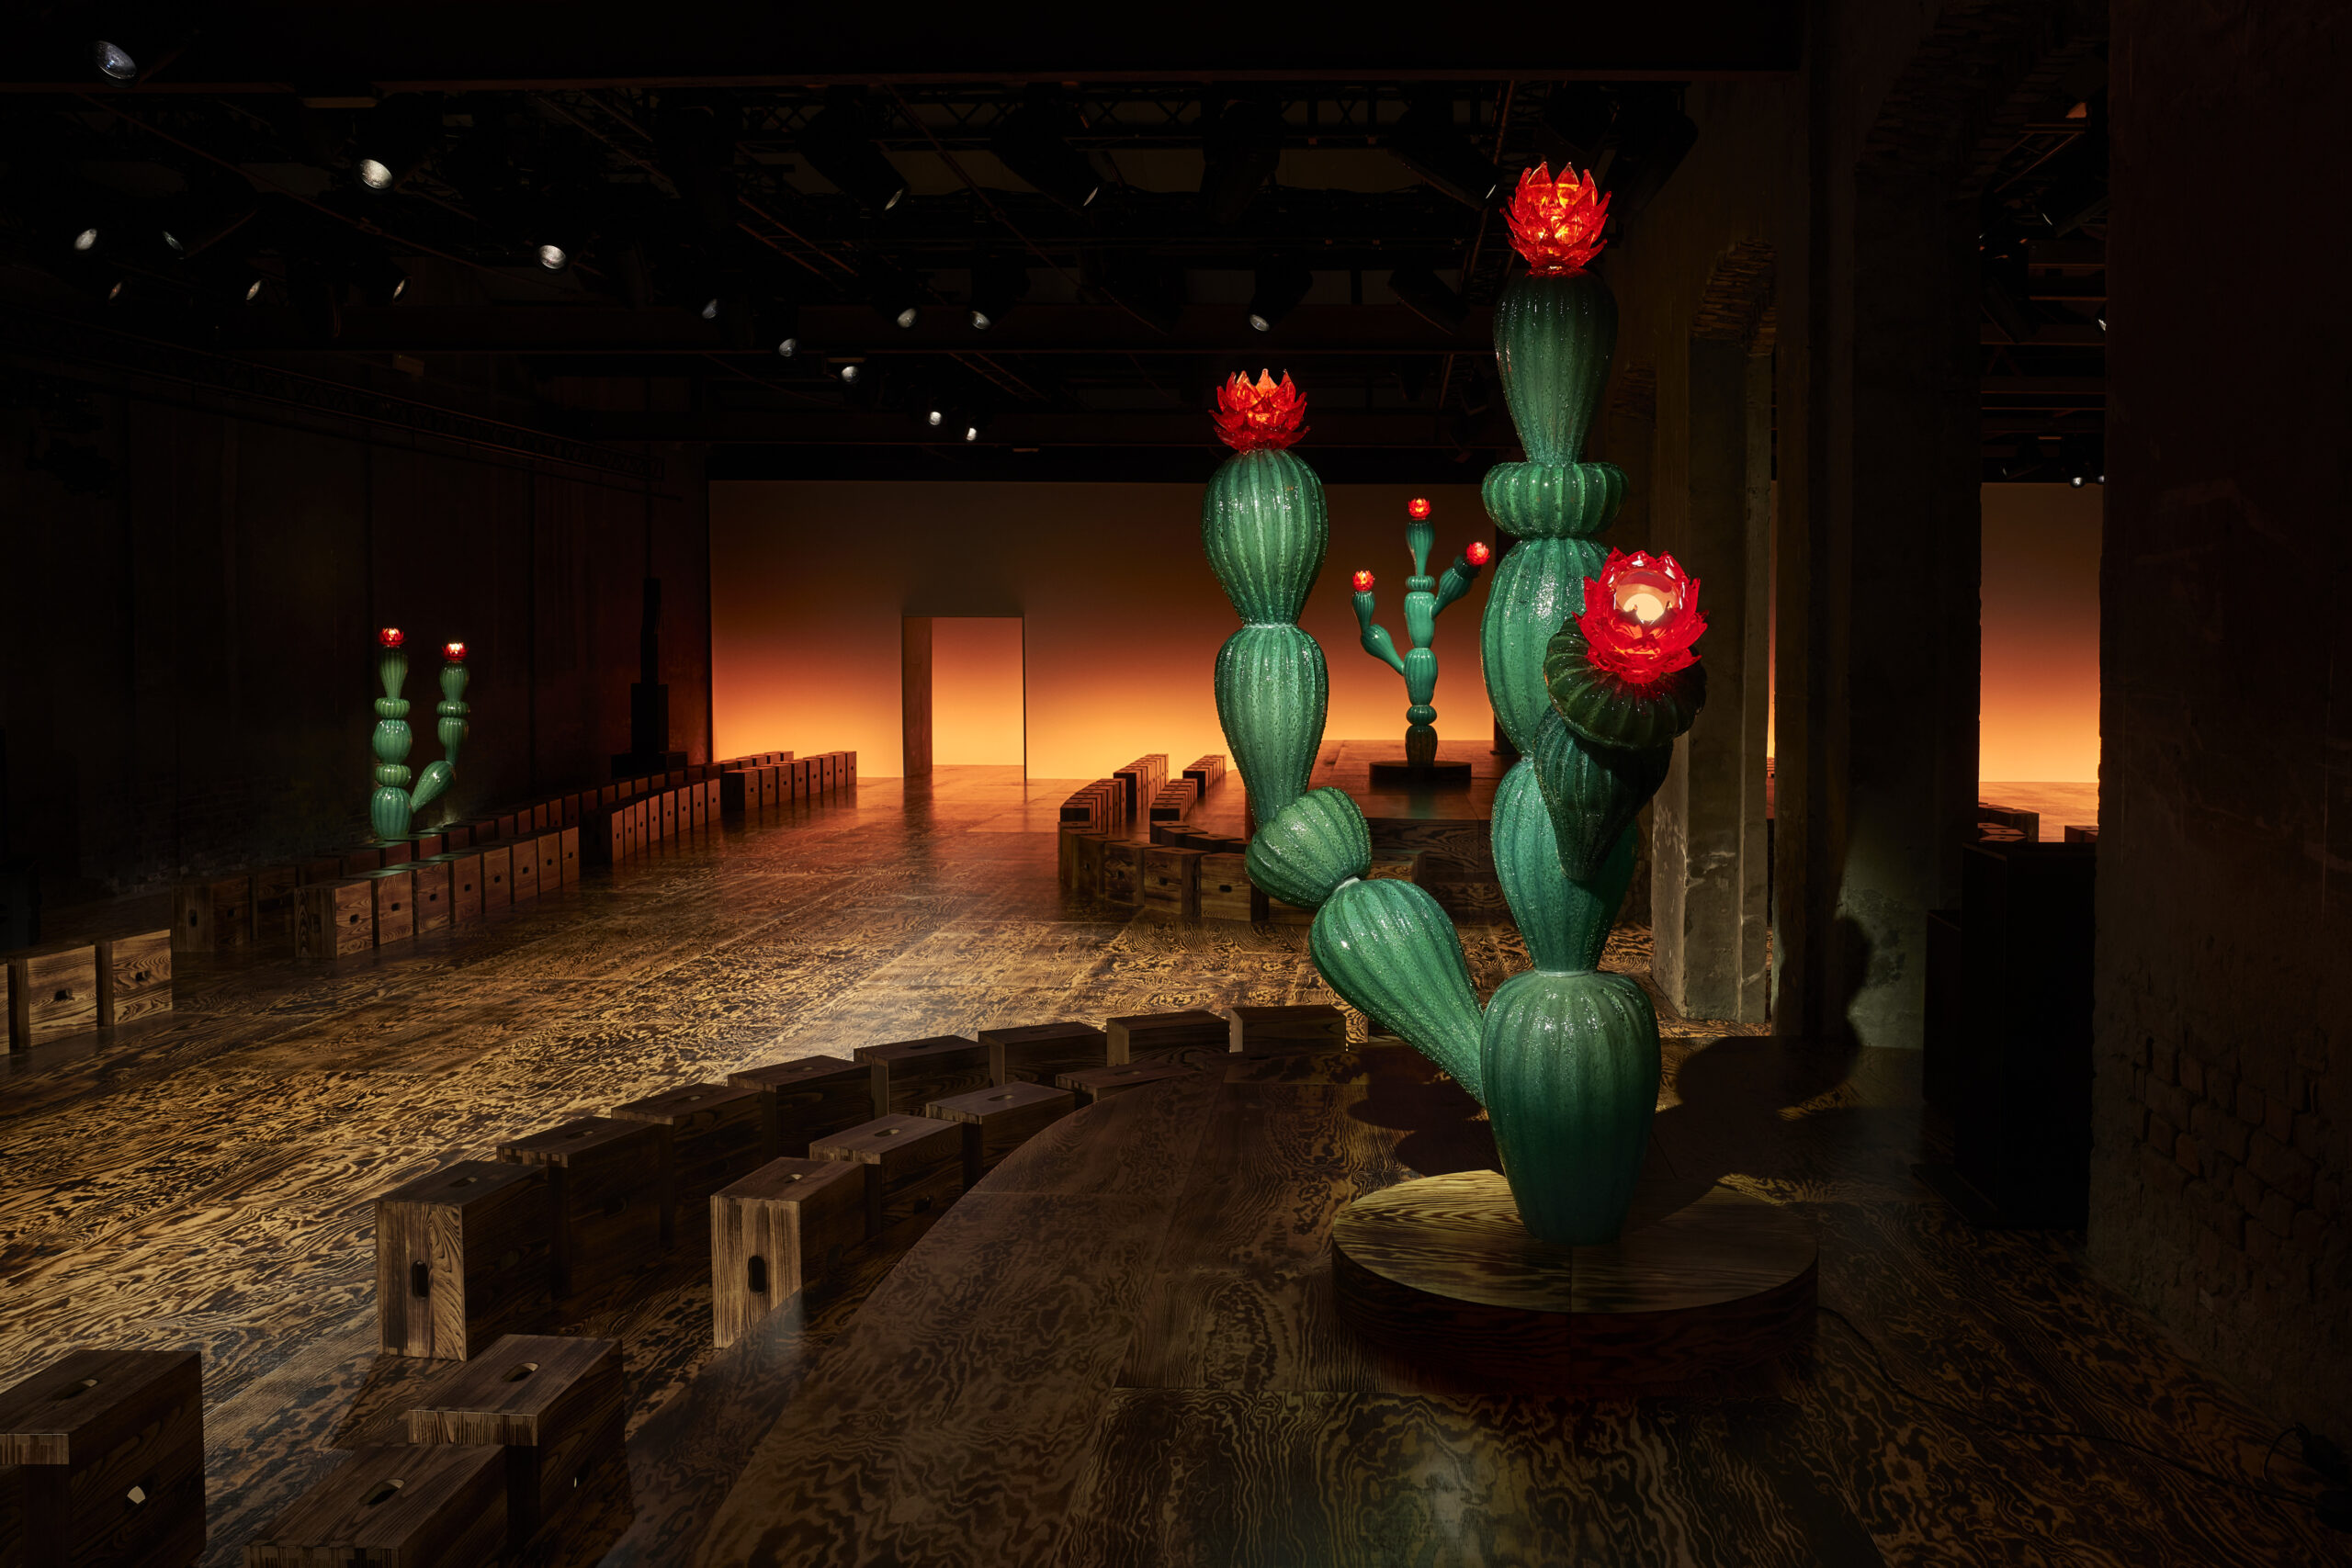 An atmospheric view of Bottega Veneta's Fall/Winter 2024 fashion show venue, featuring artistic cactus sculptures with bright red blooms. The room is dimly lit, highlighting the sculptures and the warm, fiery backdrop at the end of the runway.